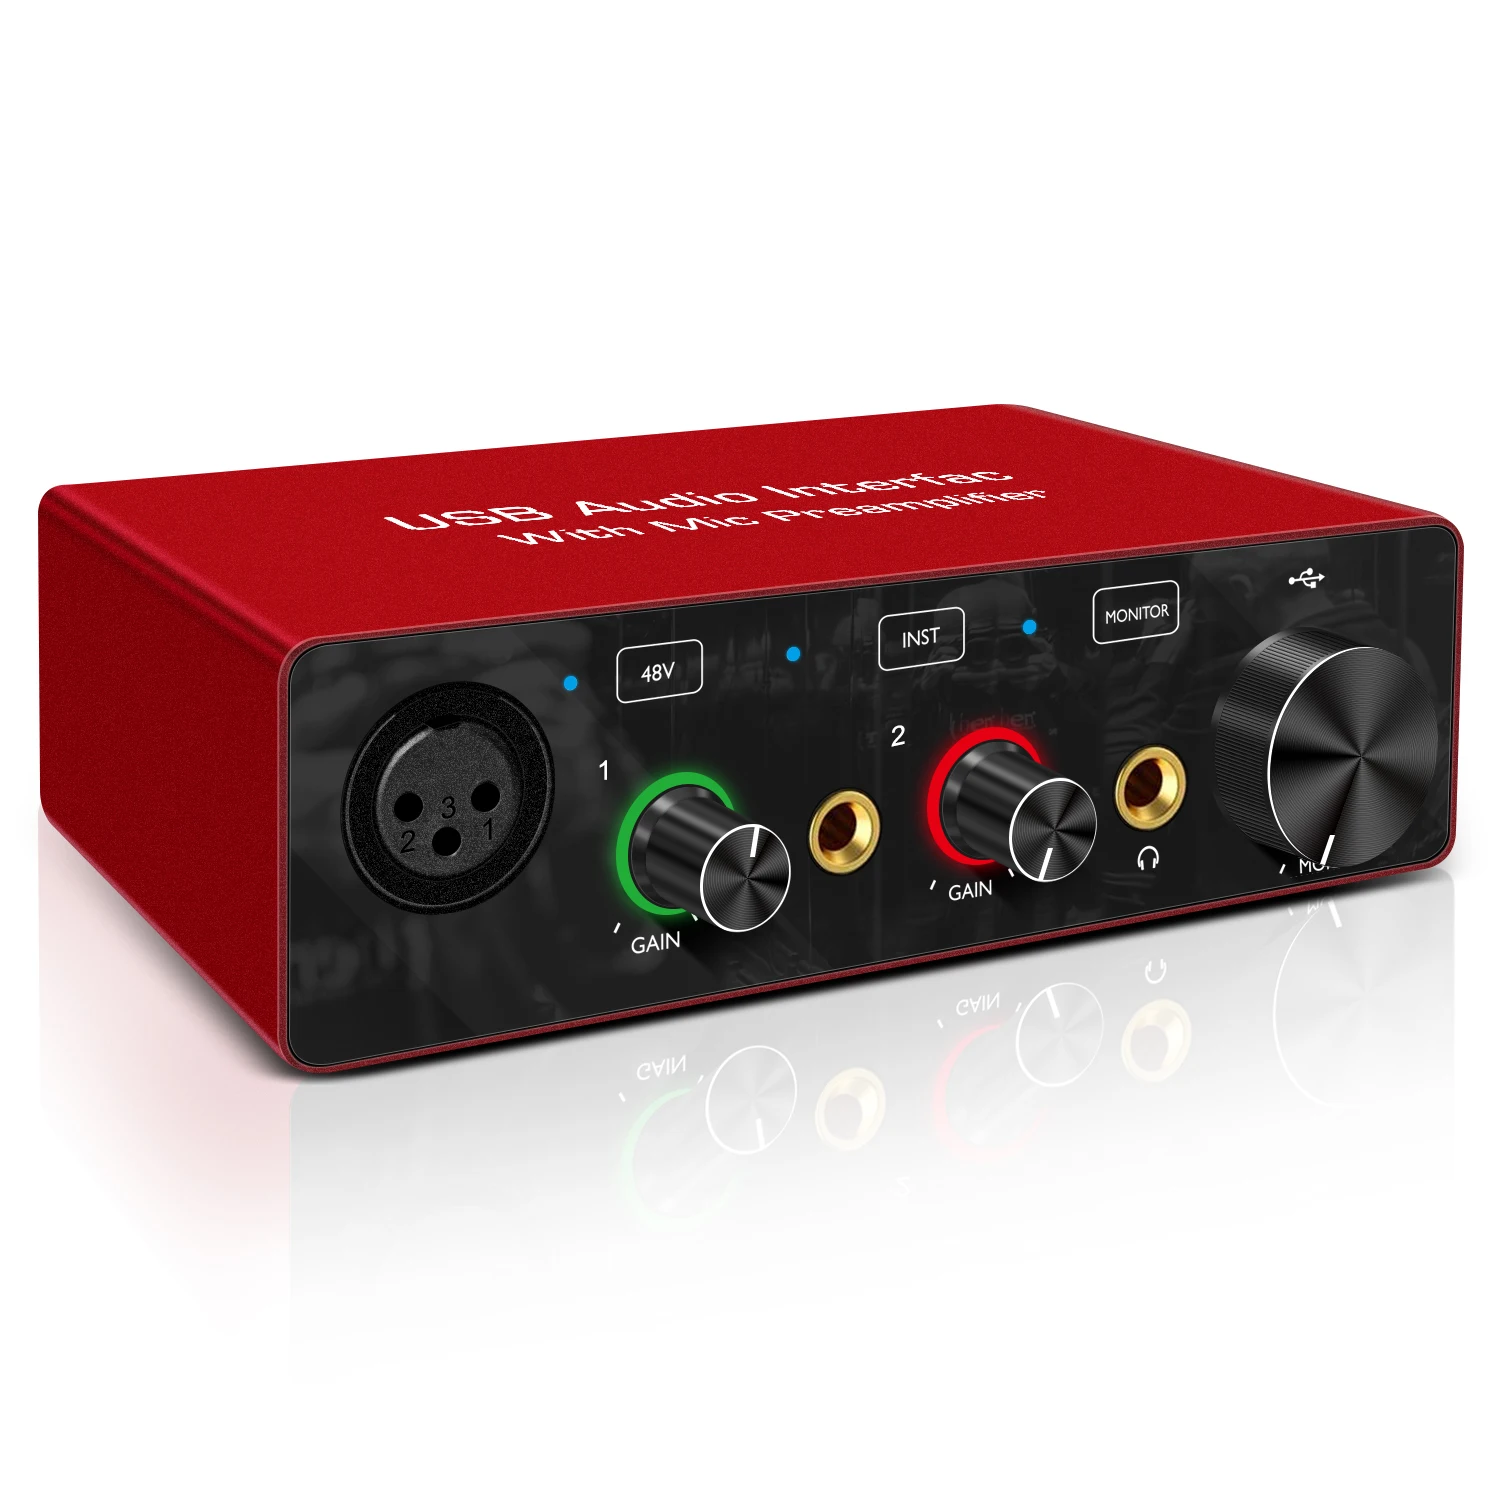 Vend om Indirekte nøjagtigt 48V Phantom Power Supply and Effect studio monitor music speakers external  sound card home recording audio interface usb _ - AliExpress Mobile